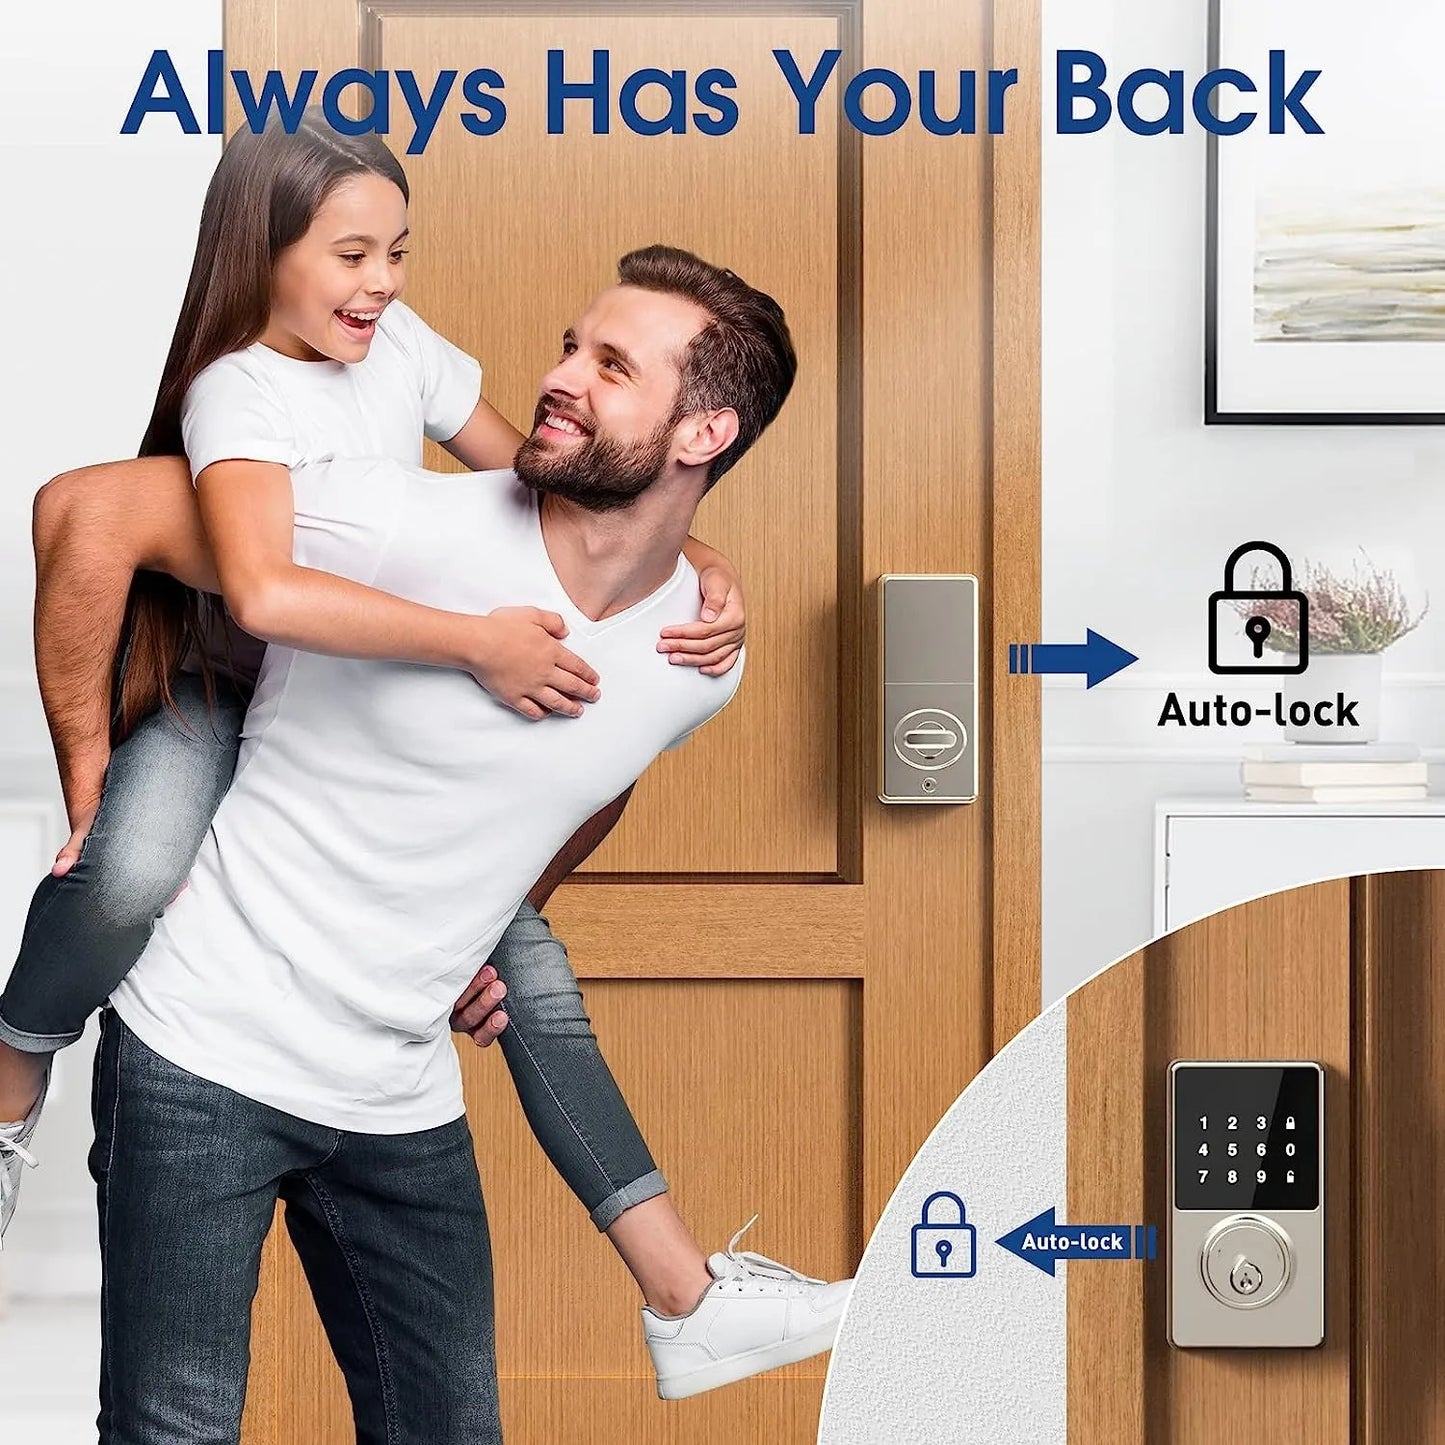 Smart Lock with password, Keyless Entry Door Lock with Touchscreen Keypads, Easy to Install, App Unlock, 50 User Codes